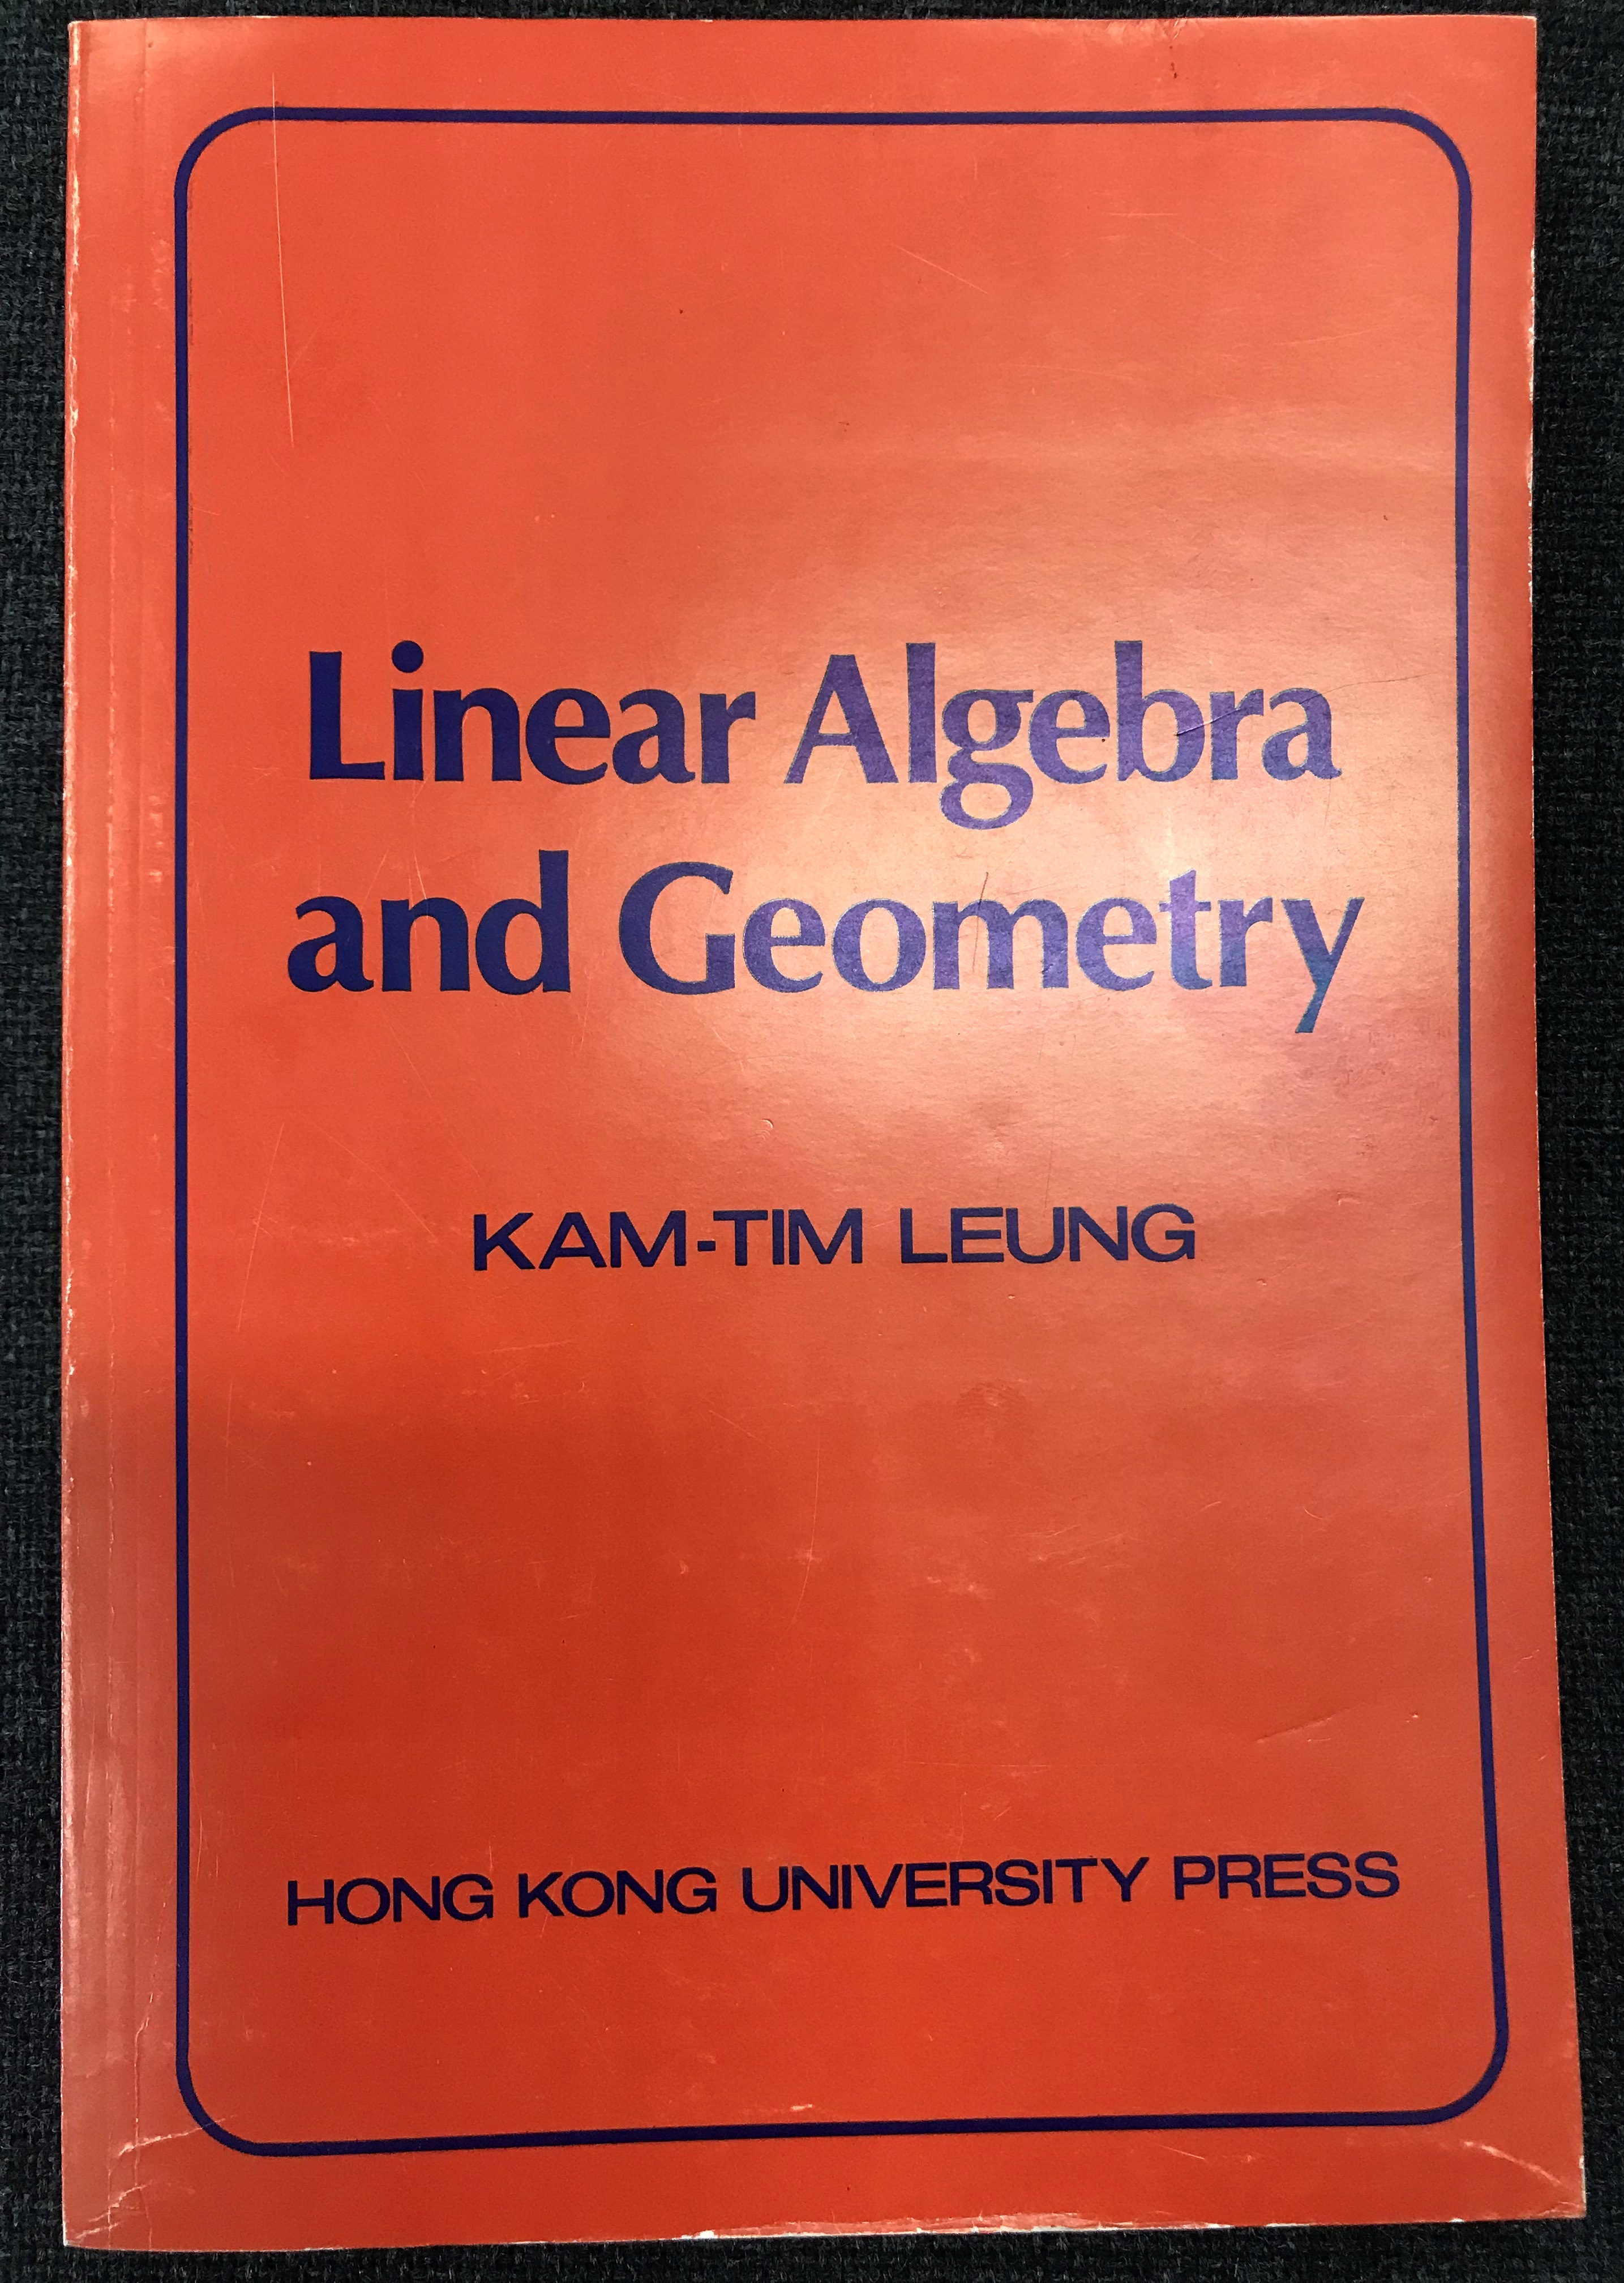 Photo of Textbook - Linear Algebra and Geometry